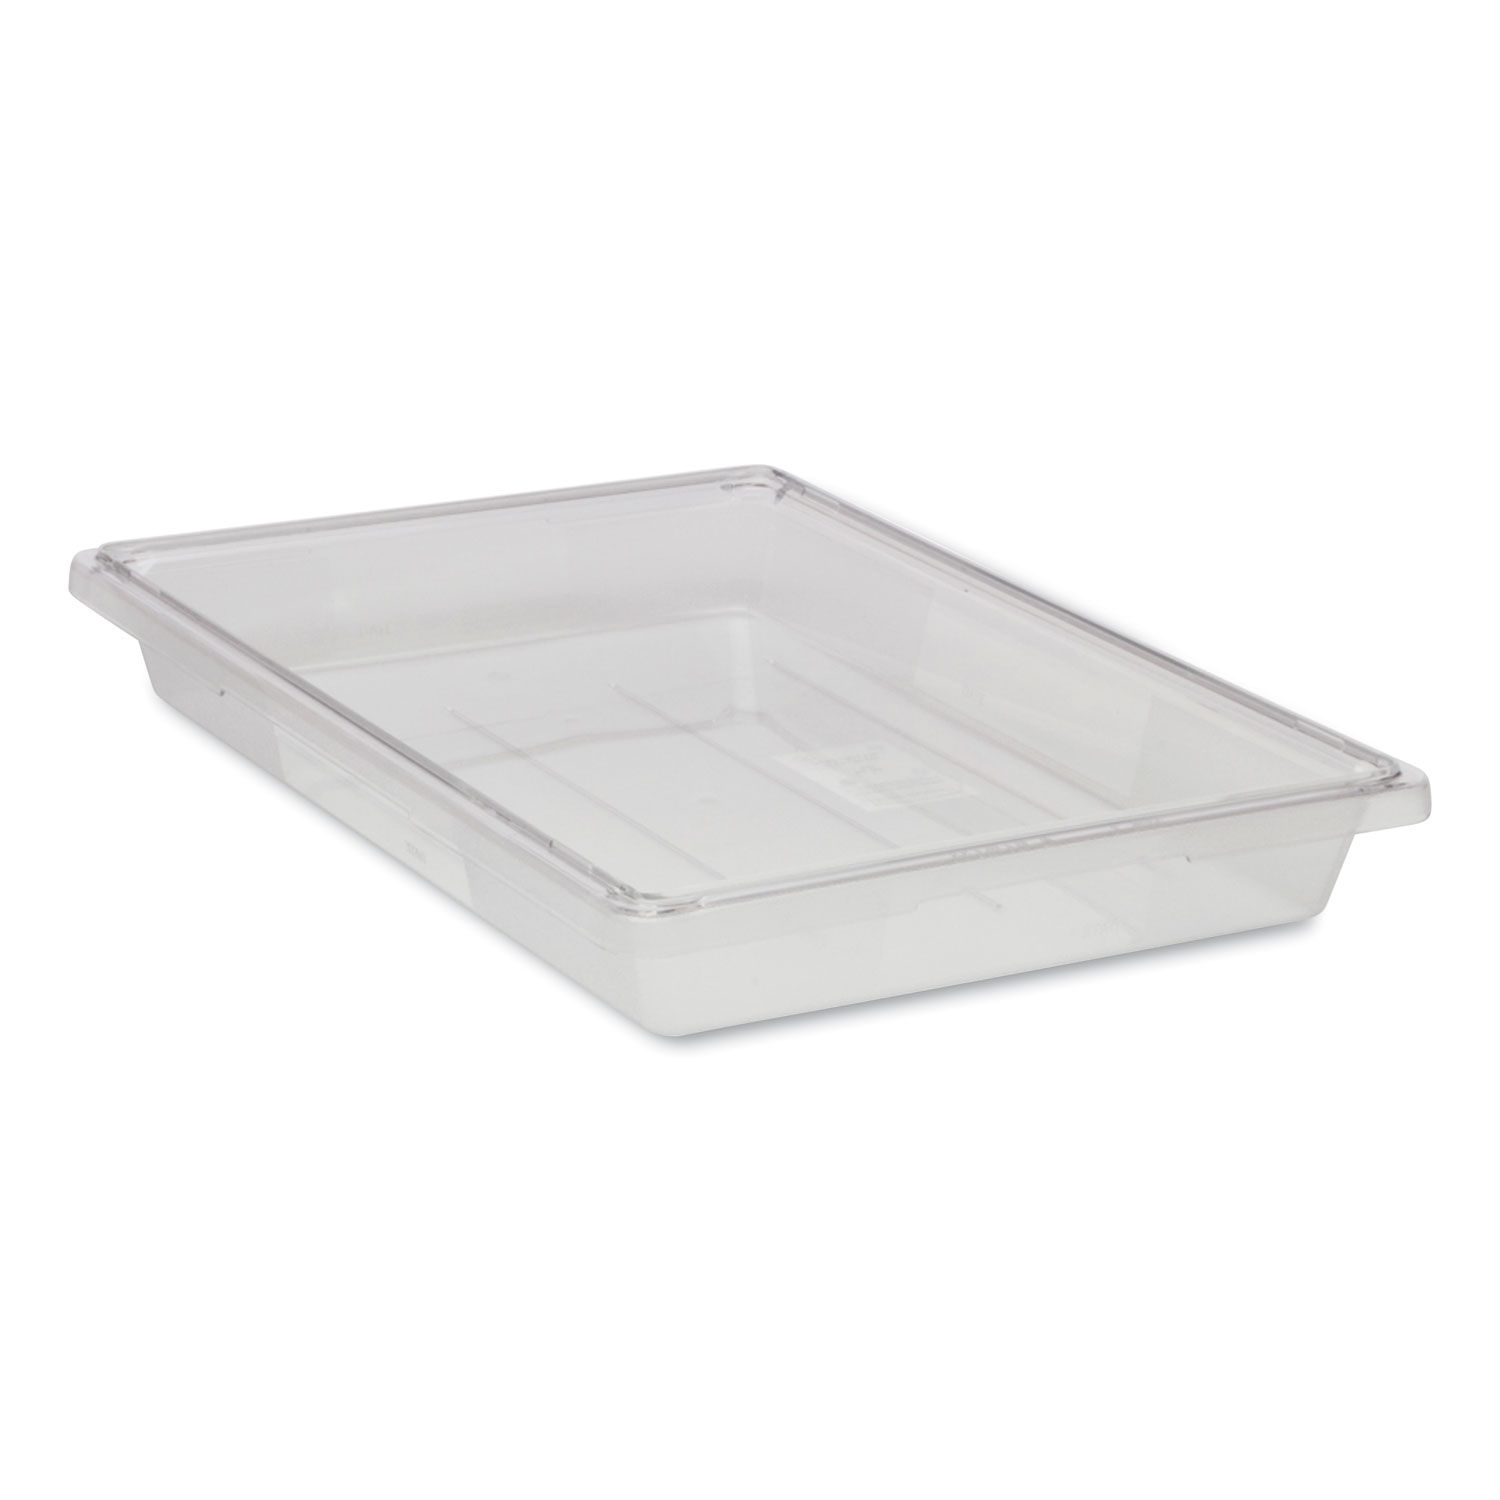 Rubbermaid Commercial Products FoodTote Boxes, 8.5 gal, 26 x 18 x 6, Clear